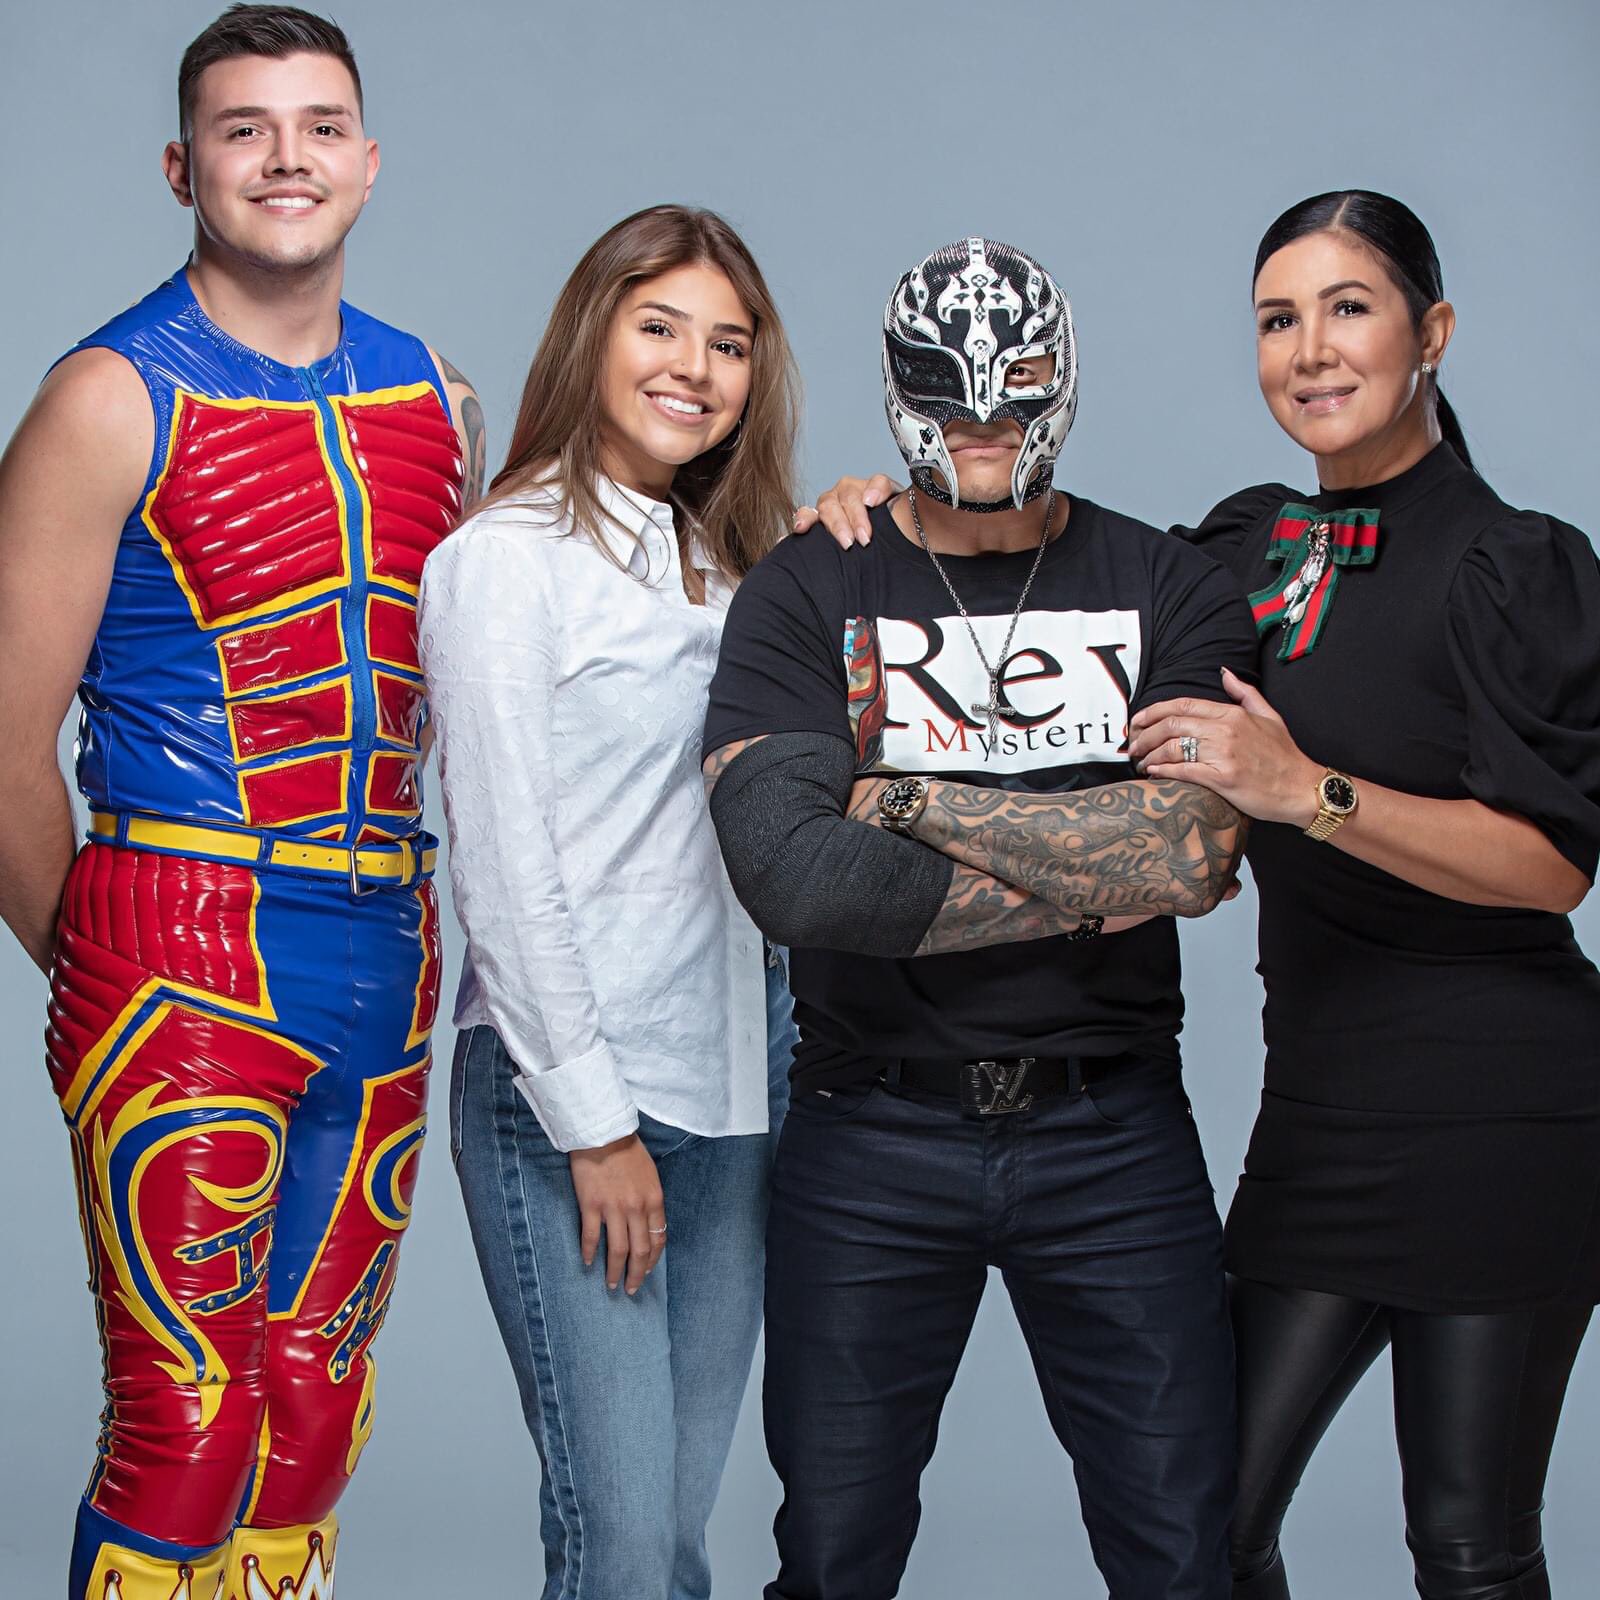 Rey Mysterio, an American professional wrestler and entrepreneur, has achieved numerous wrestling accolades throughout his career.
In addition, he actively participates in various media projects, including video games and movie roles.
As of March 2024, experts estimate his net worth to be $10 Million.